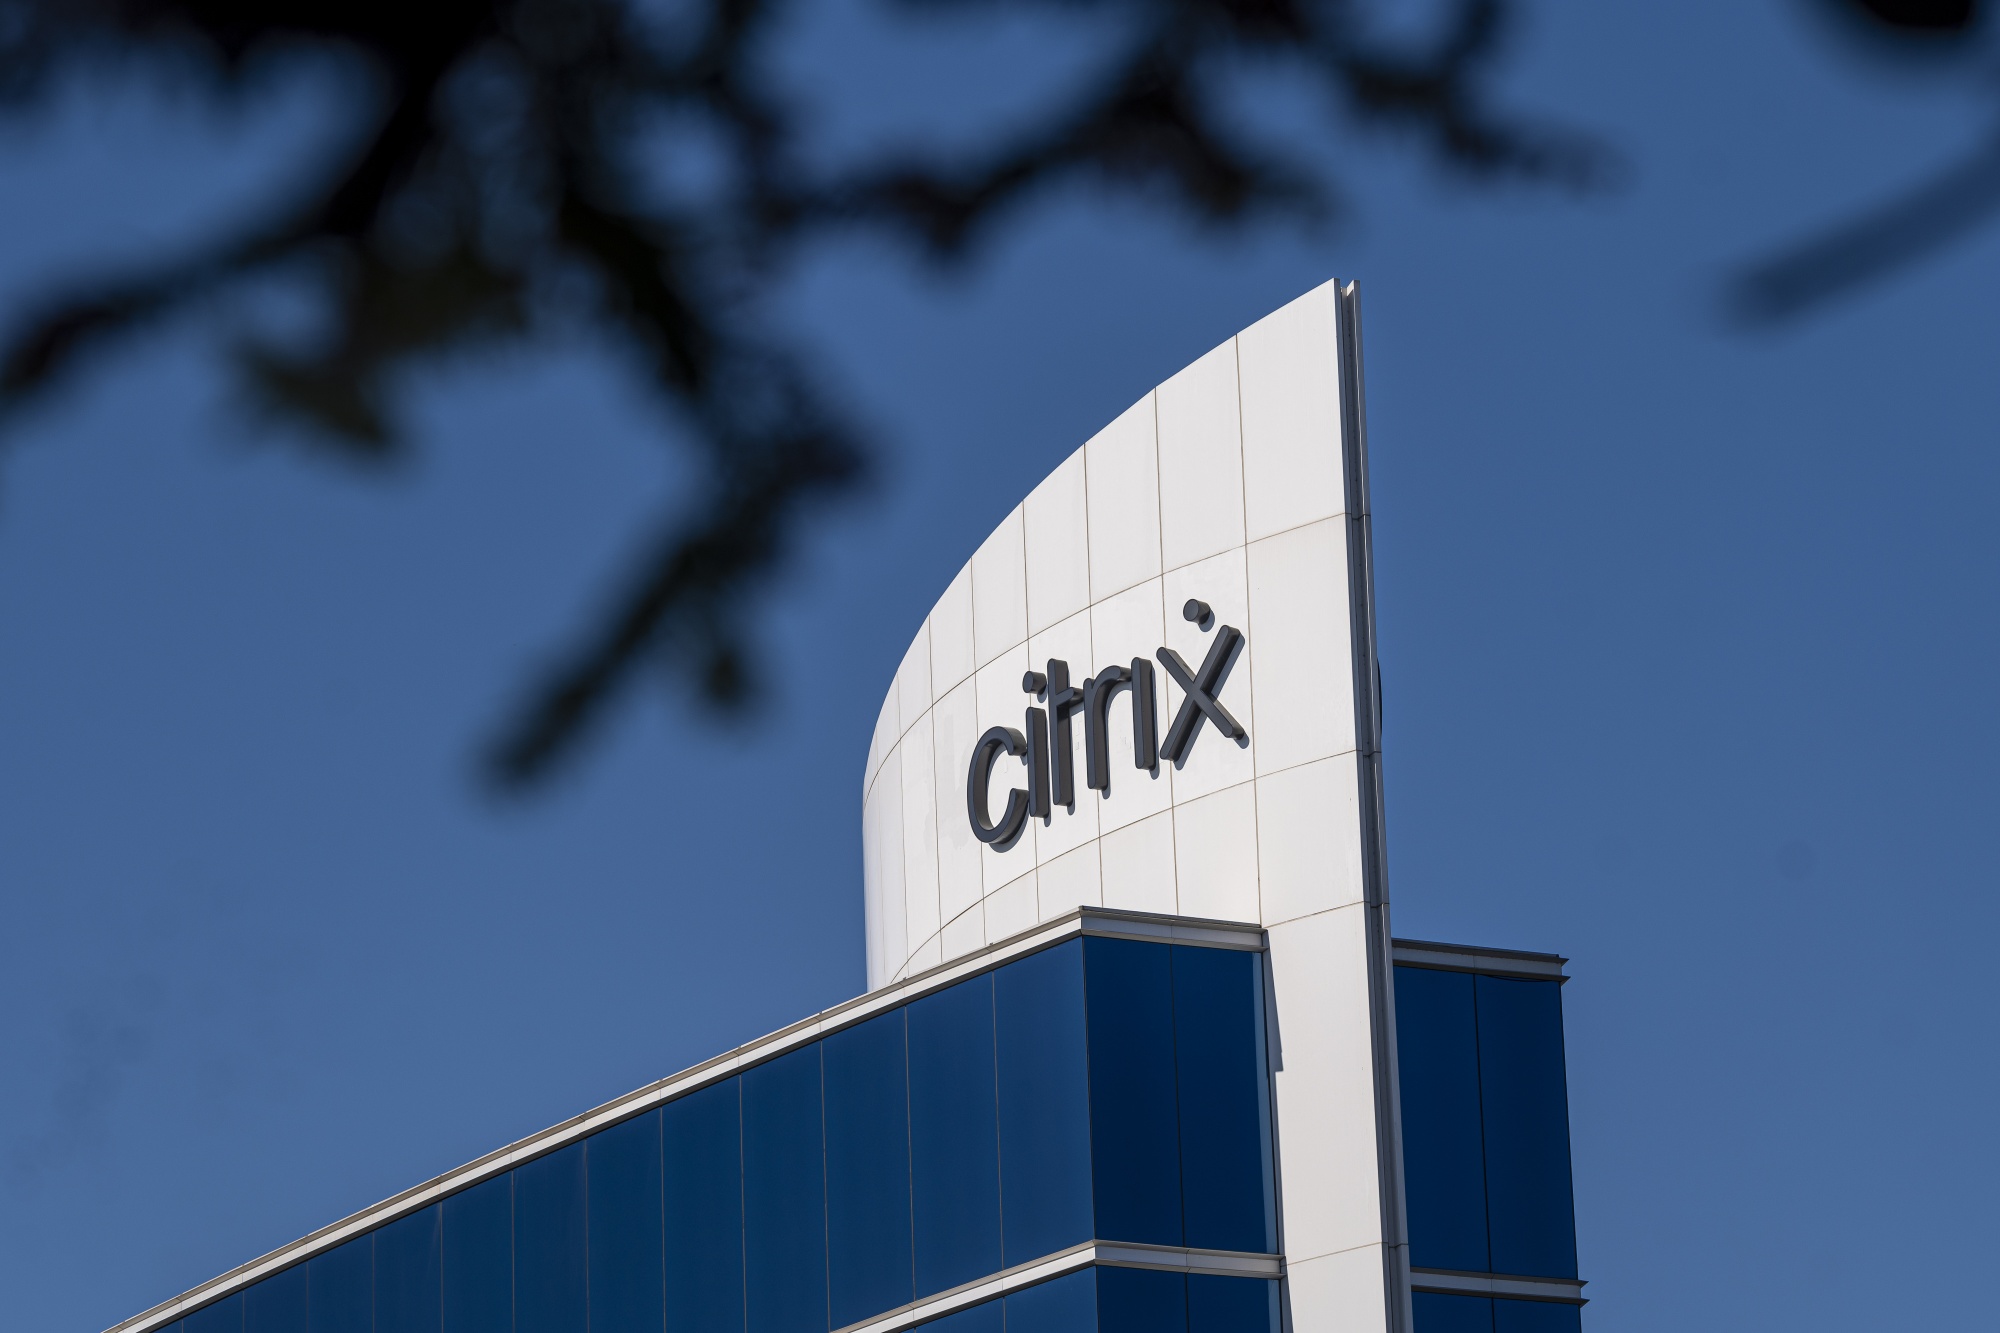 A high-profile deal like the take-private of Citrix Systems, which was expected to generate hundreds of millions of dollars in fees, could now deliver $1 billion in losses instead.